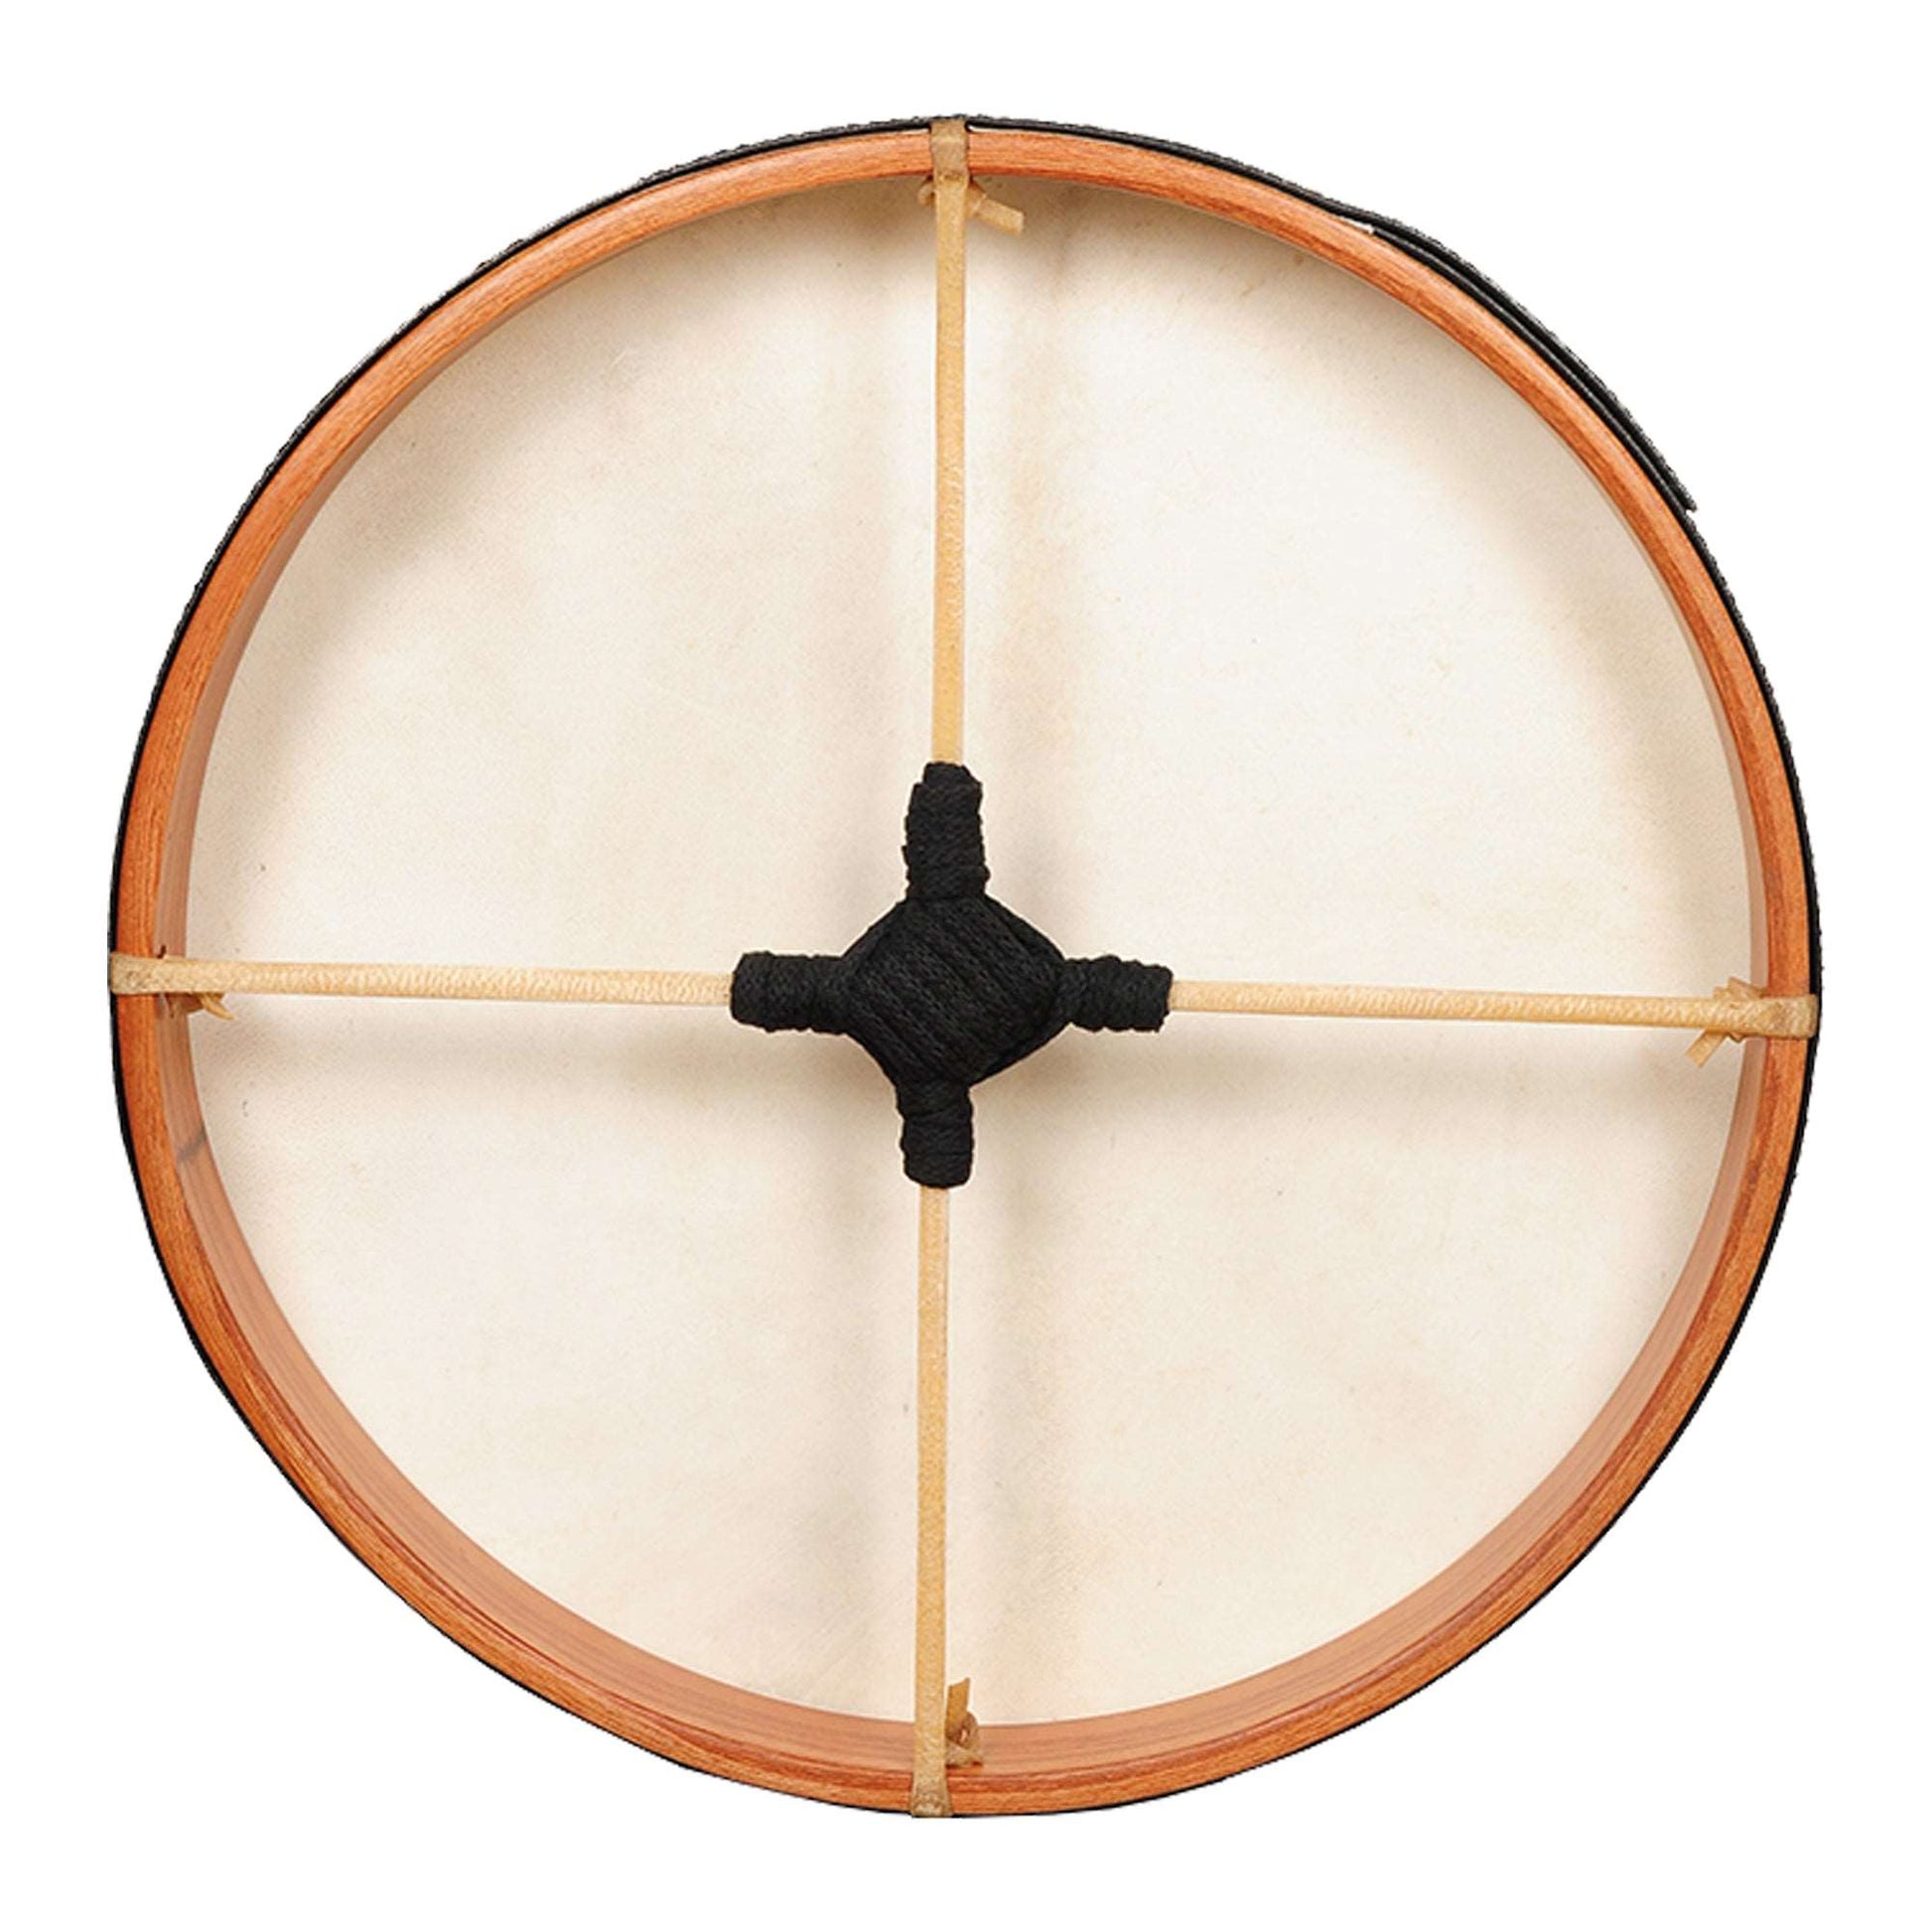 Frame Drum 10 inch Non Tunable Red Cedar